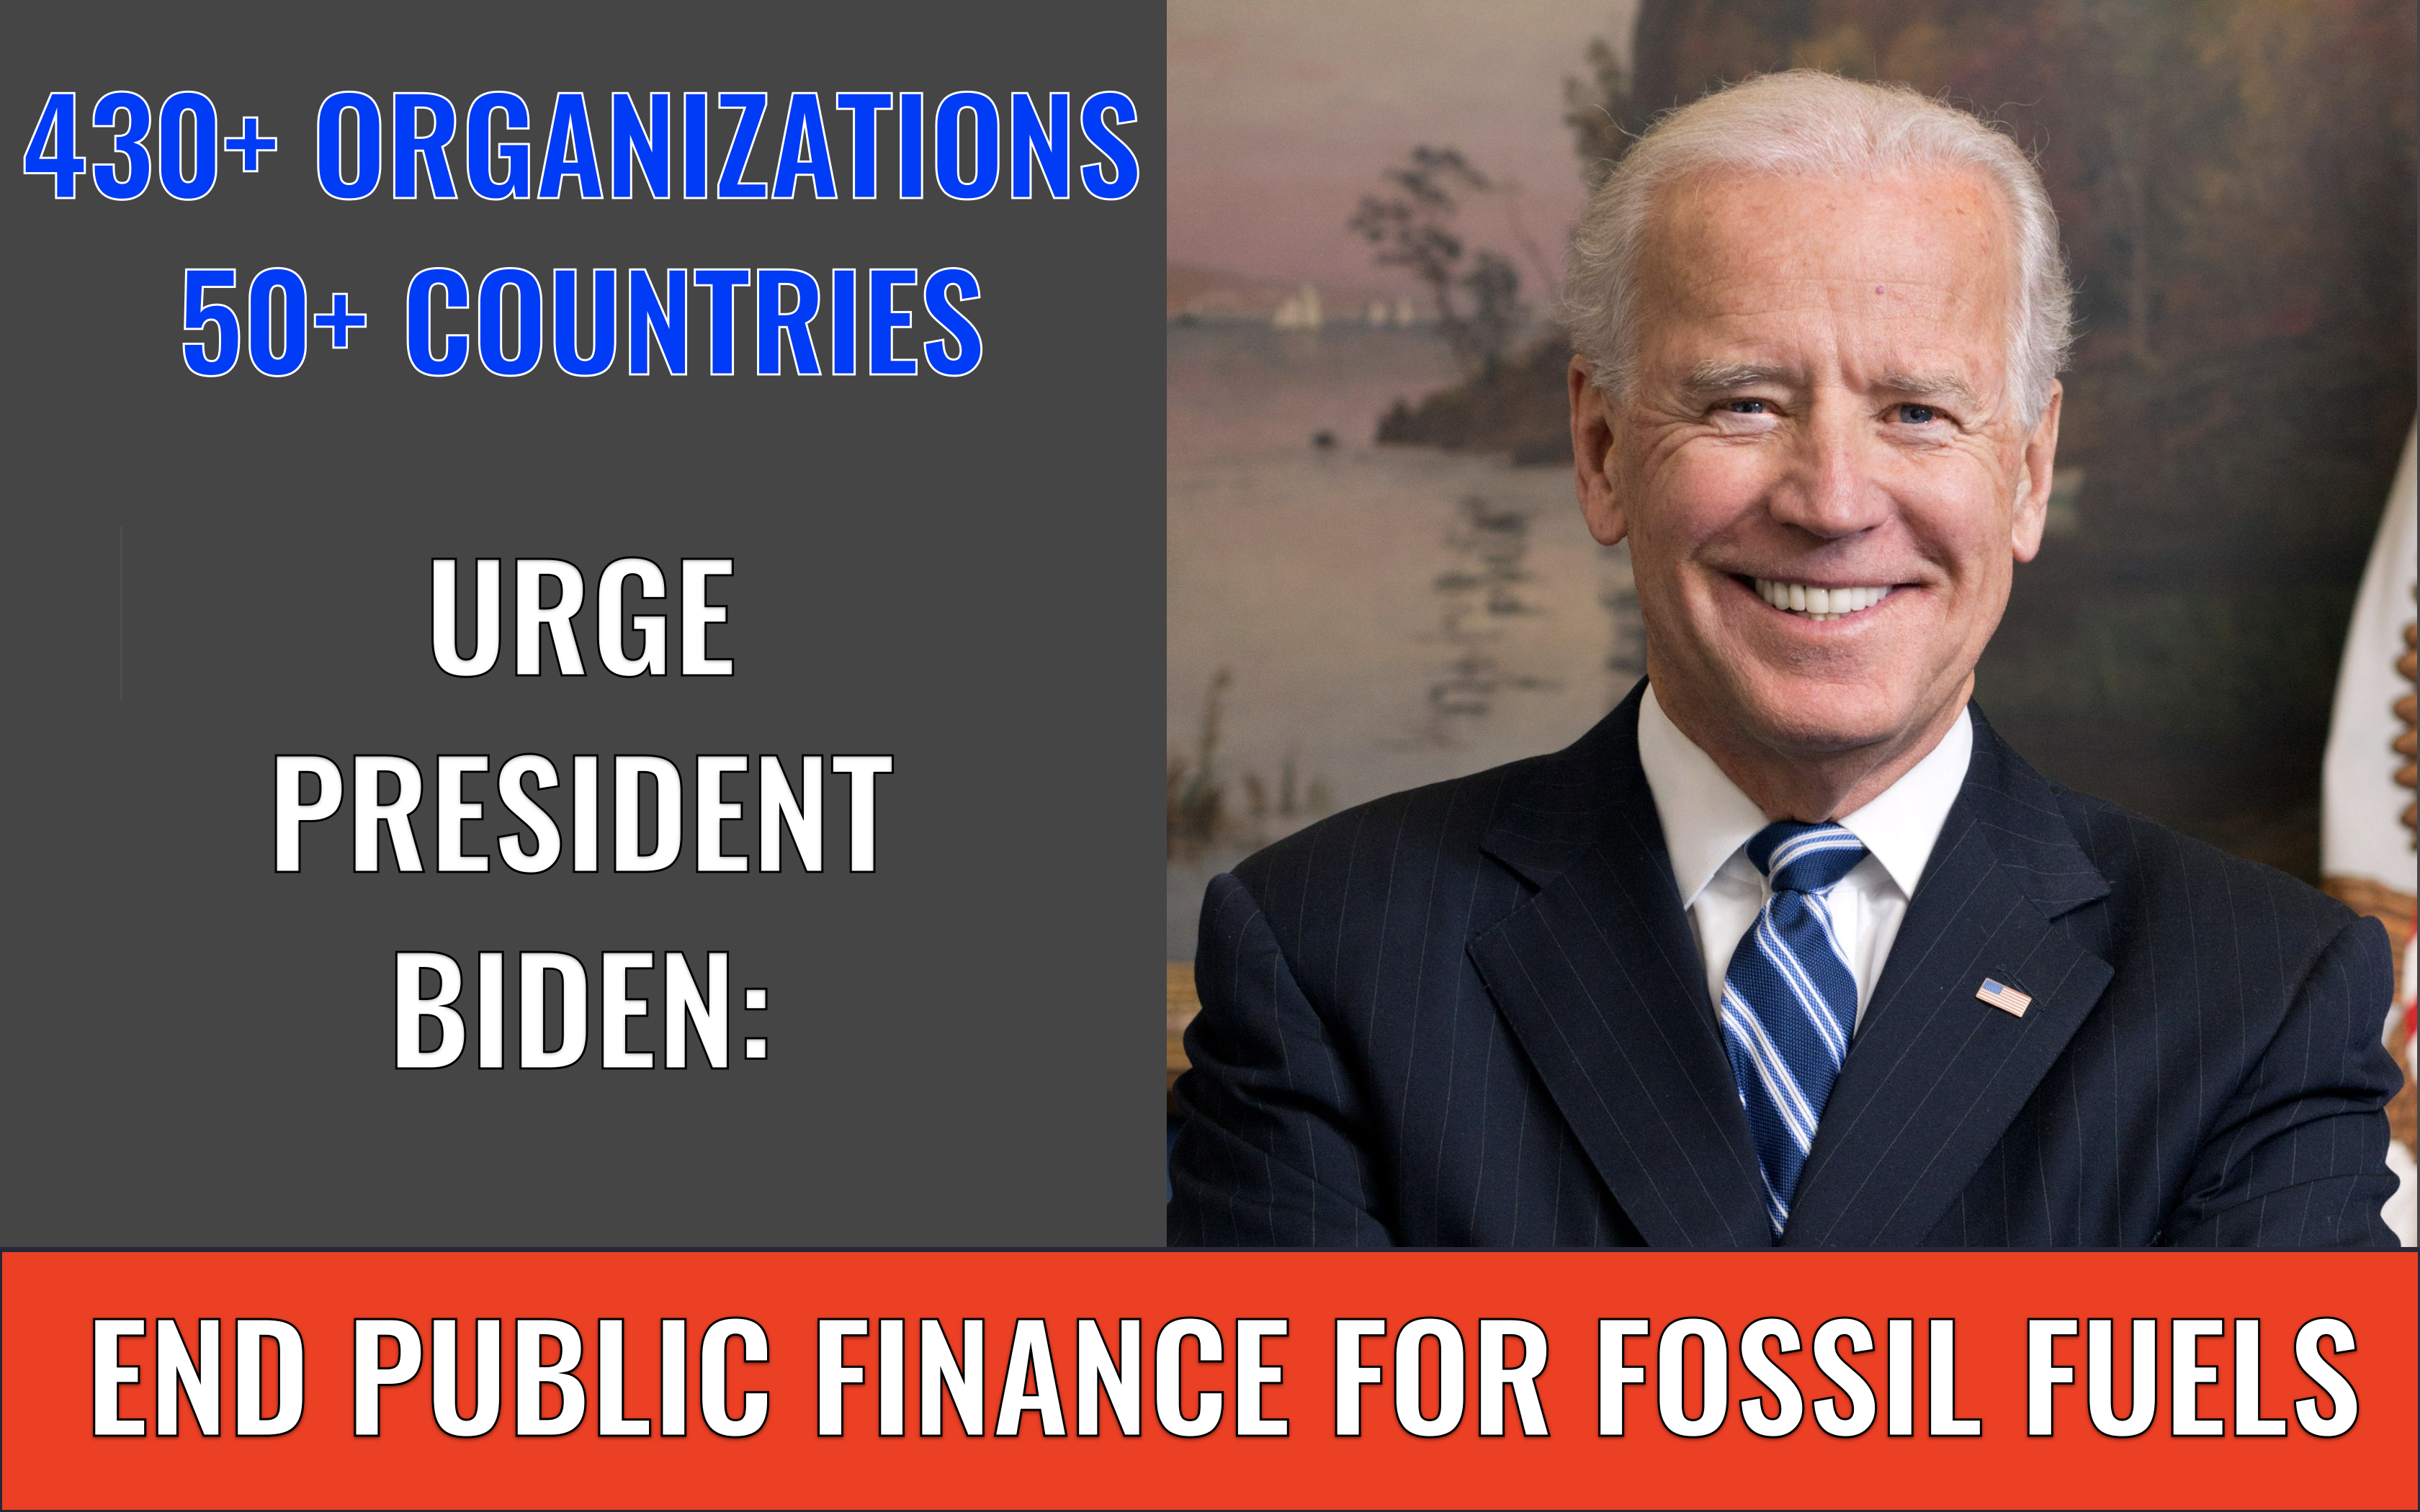 Nearly 450 Organizations Call on Biden Administration to End Public Finance for Fossil Fuels